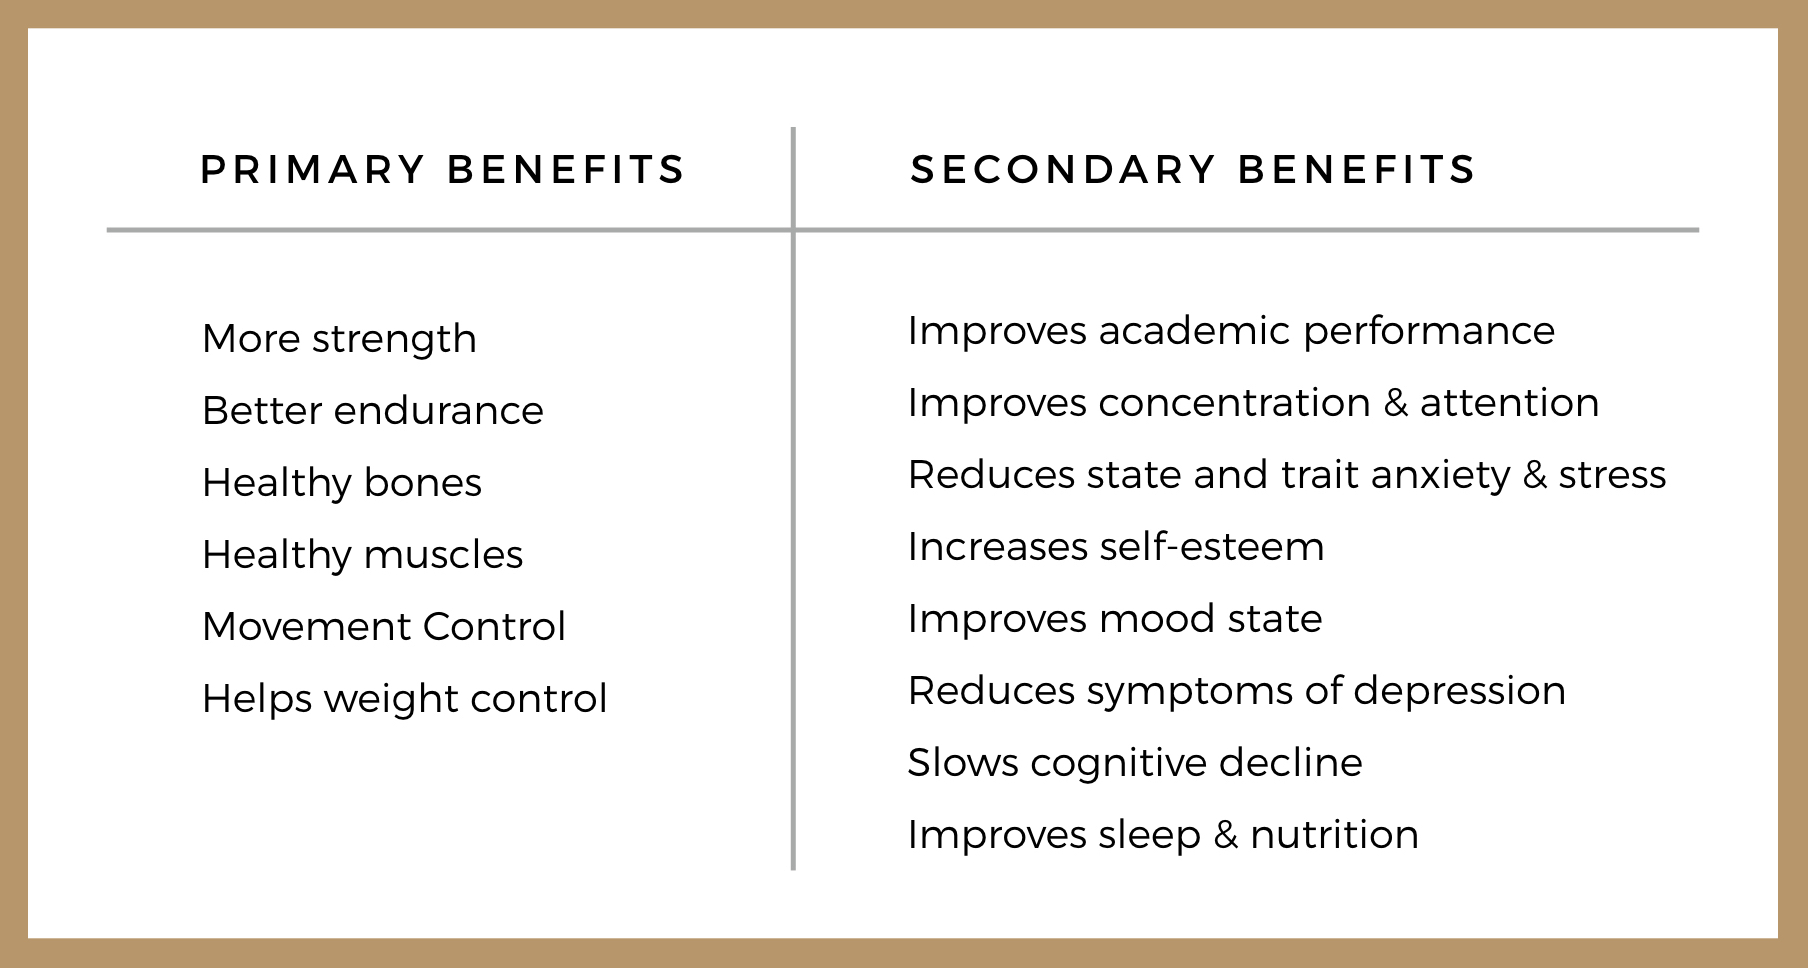 Physical Activity Benefits